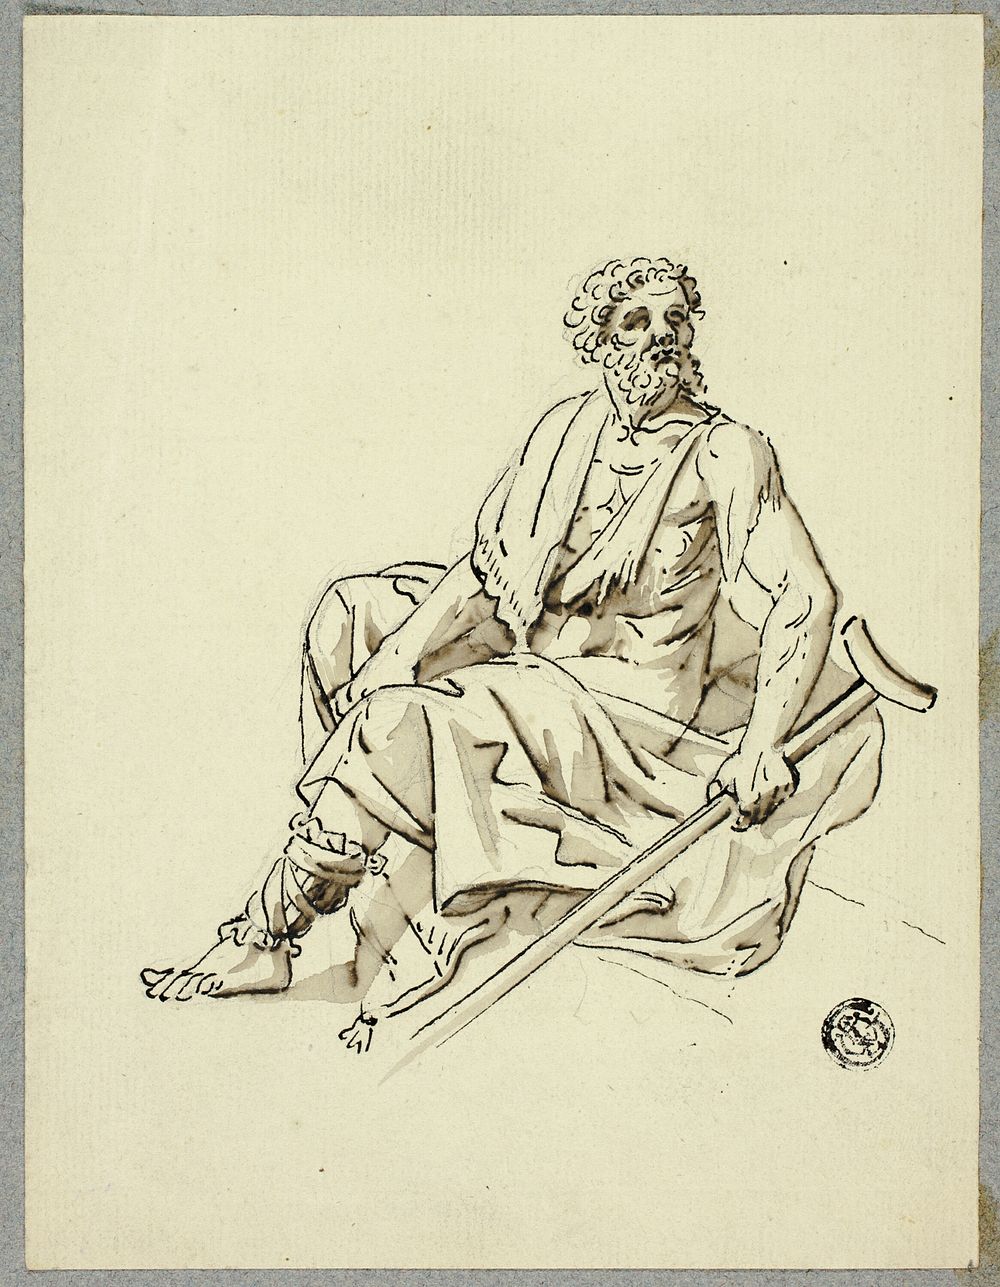 Seated Old Man with Crutch by Hans Heinrich Meyer